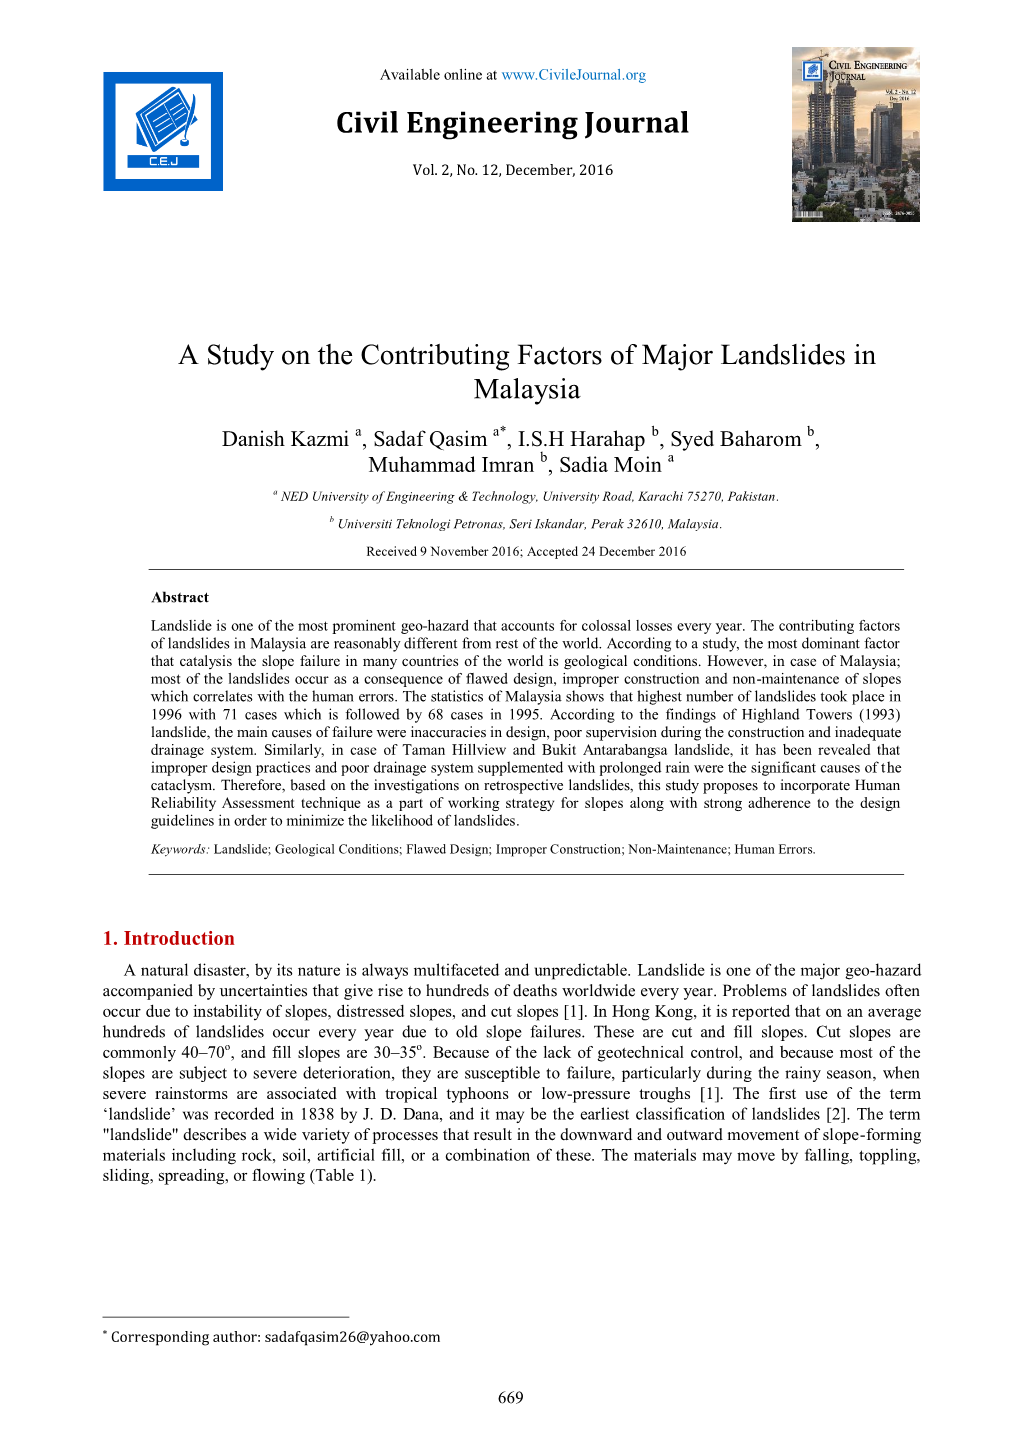 A Study on the Contributing Factors of Major Landslides in Malaysia